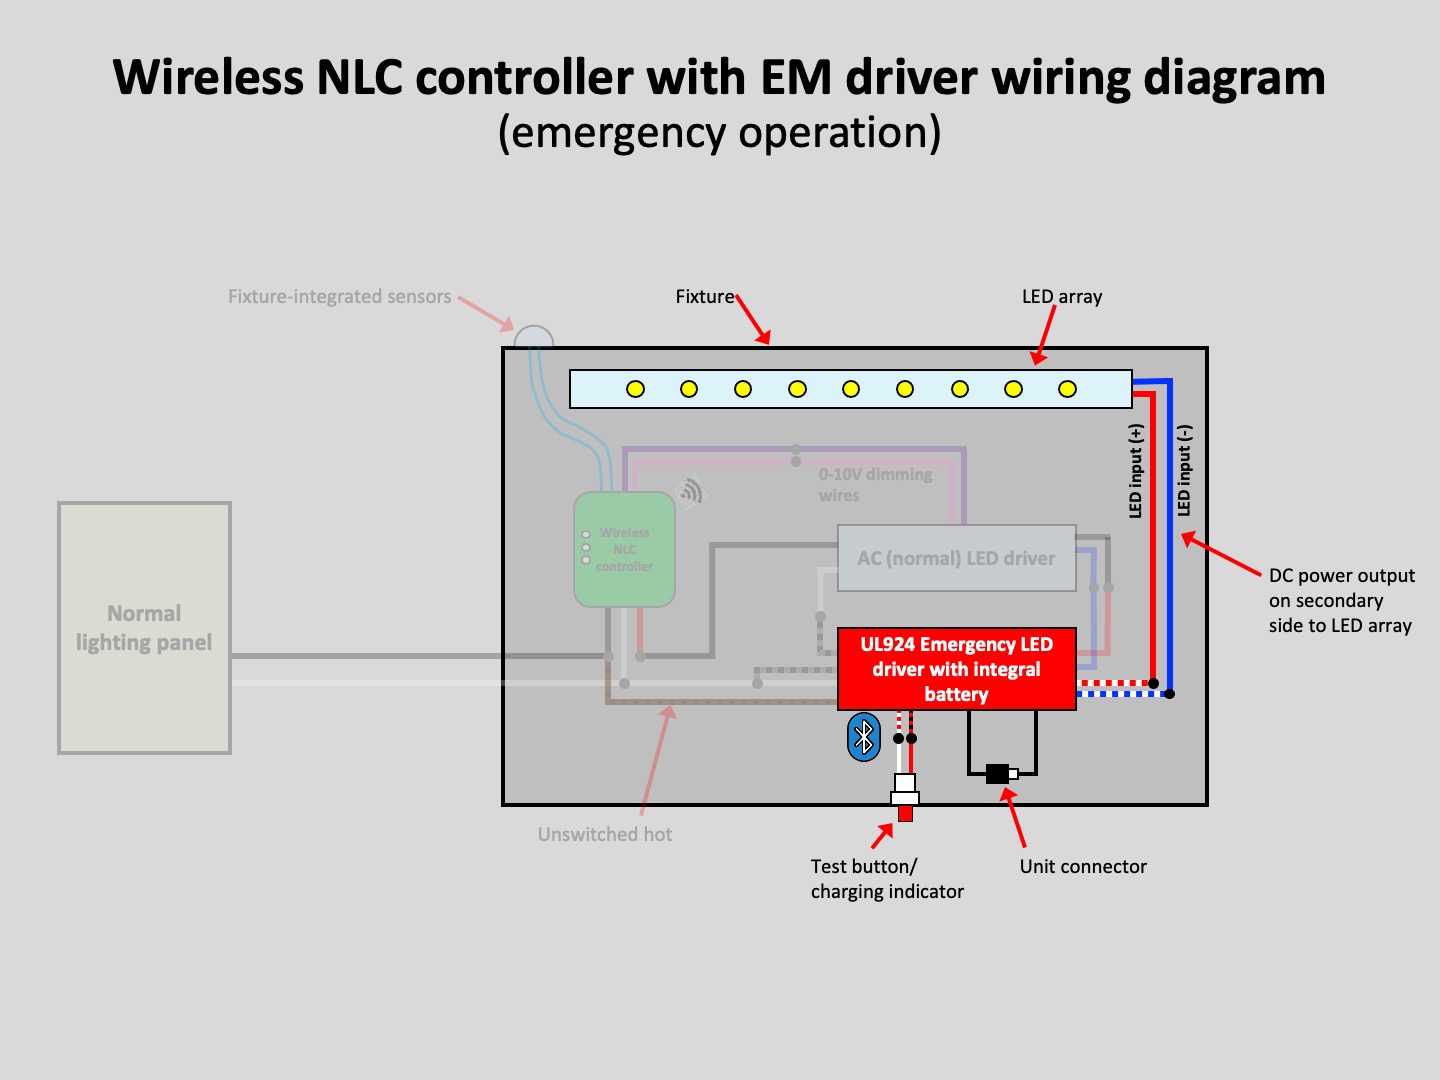 Wireless NLC controller with EM driver wiring diagram Fixture-integrated sensors (emergency operation)